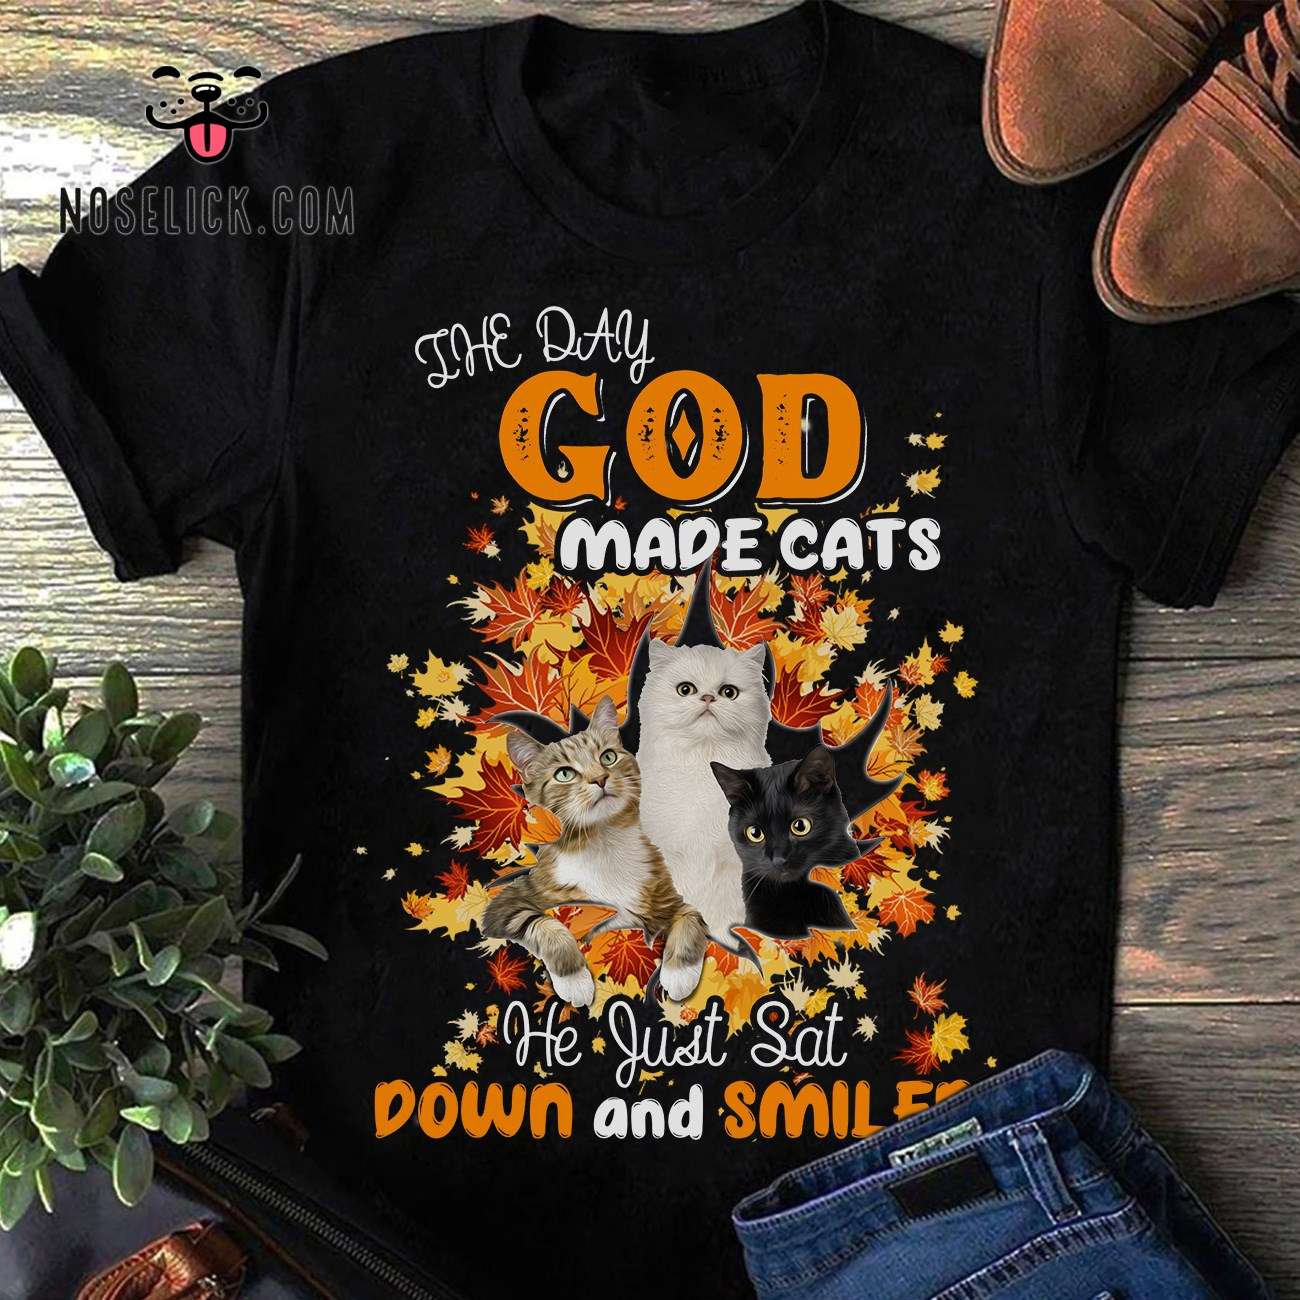 The day god made cats he just sat down and smiled - Autumn season with cat, god loves cats